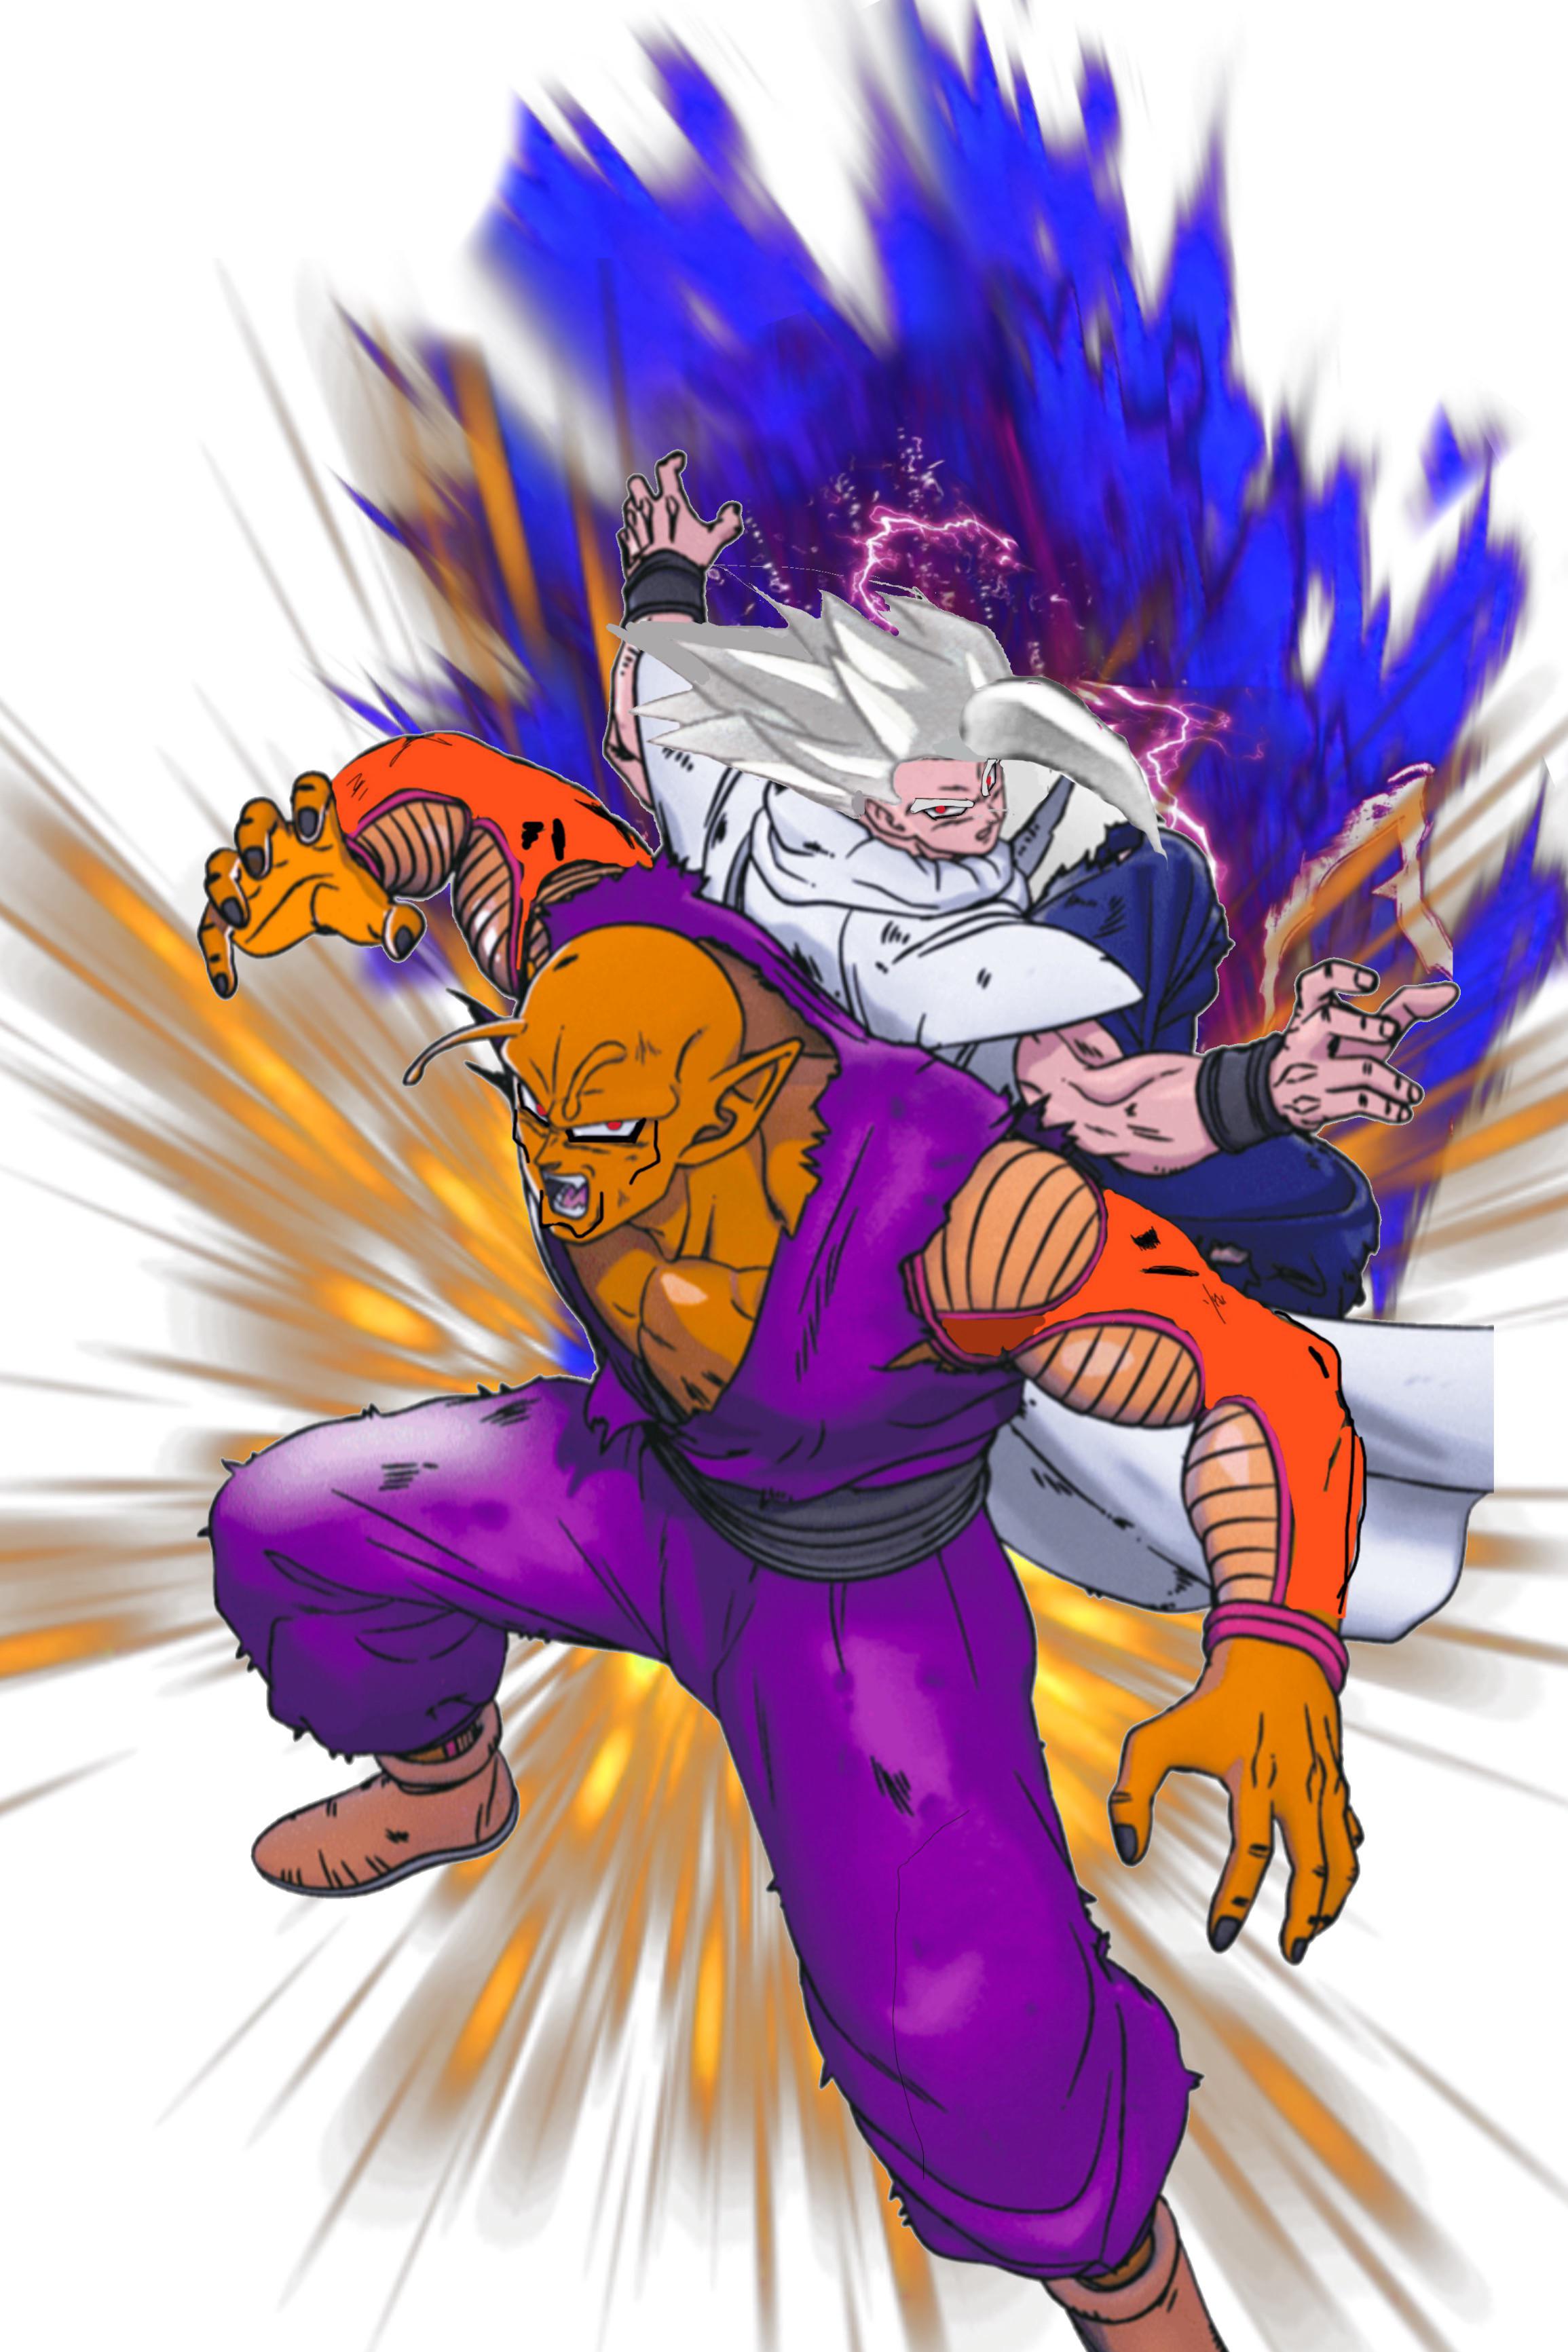 My edit of piccolo and gohan (SPOILERS)